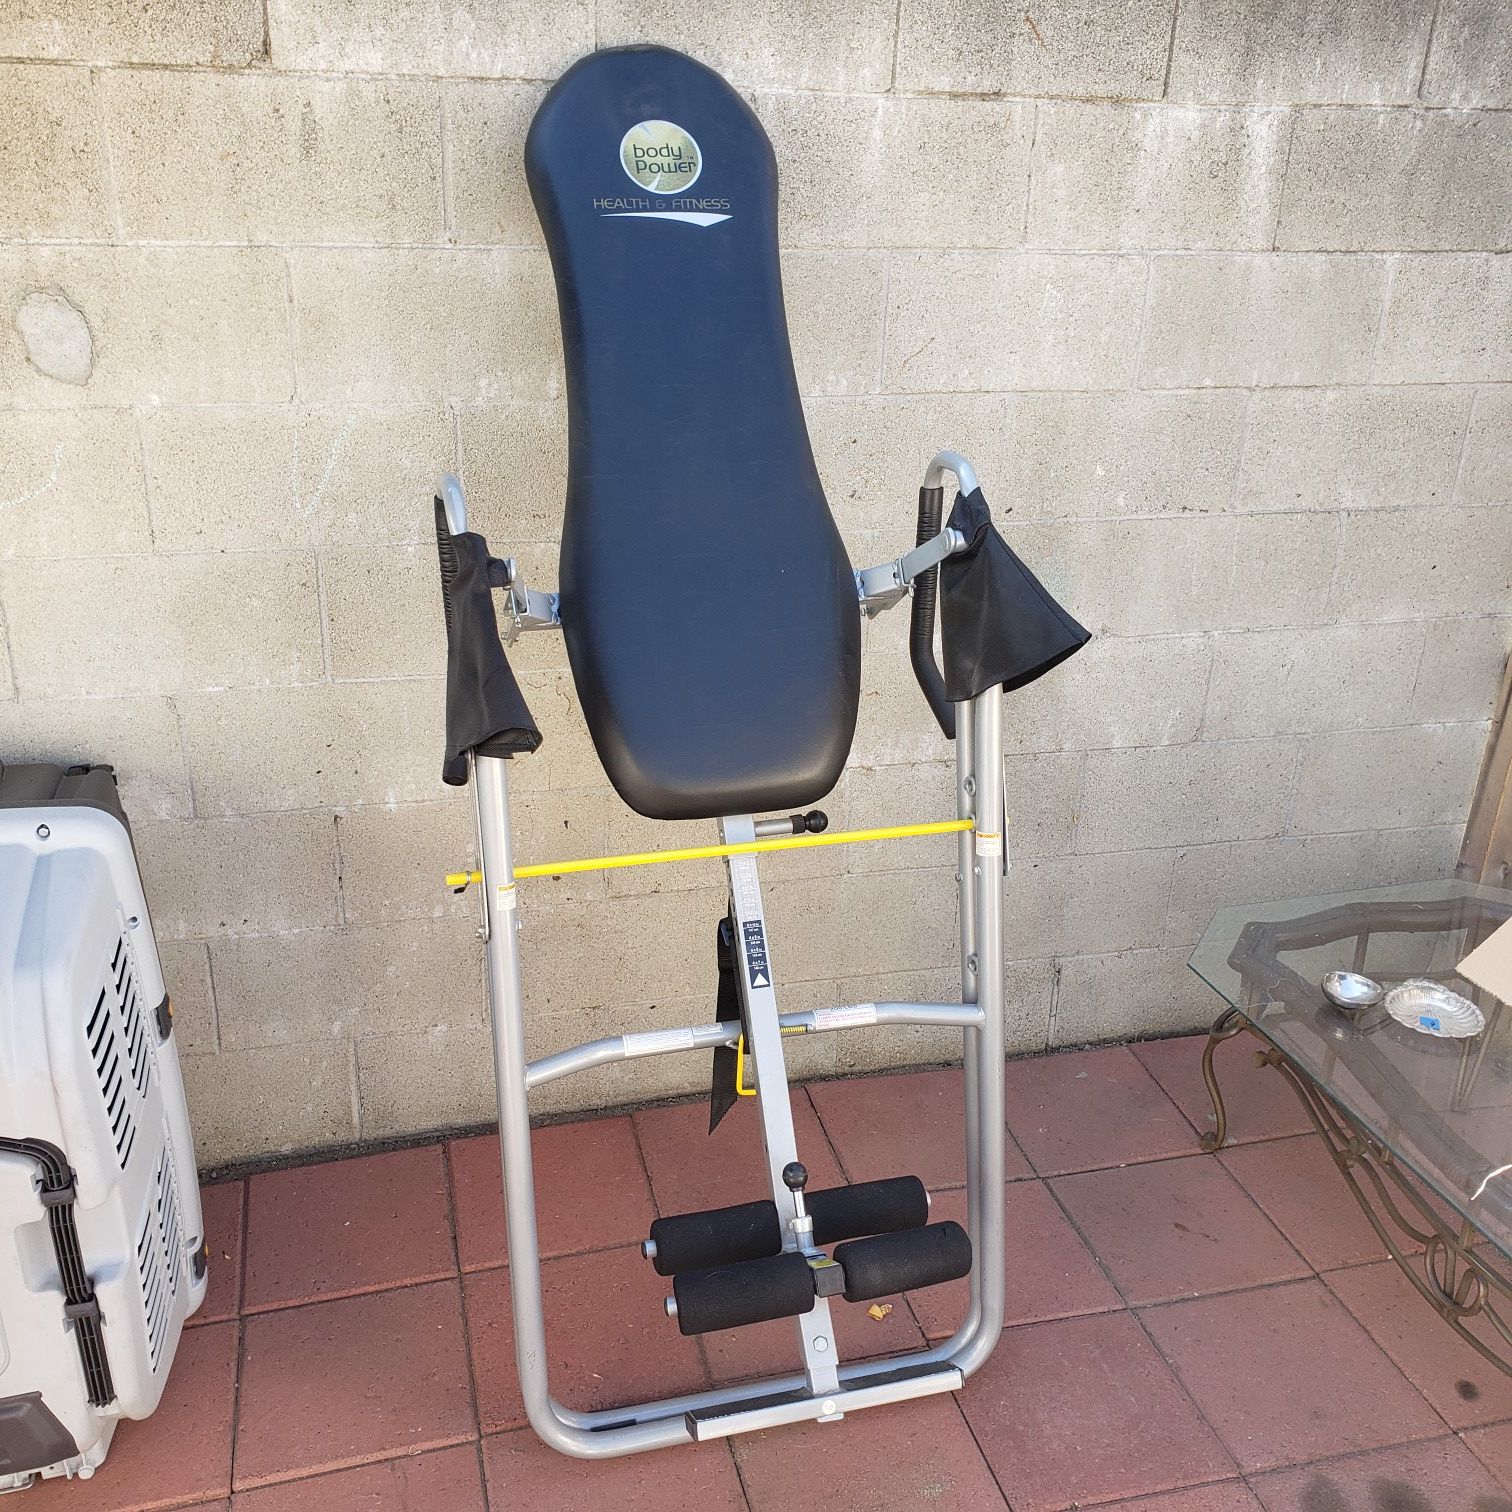 Body Power health and fitness inversion table